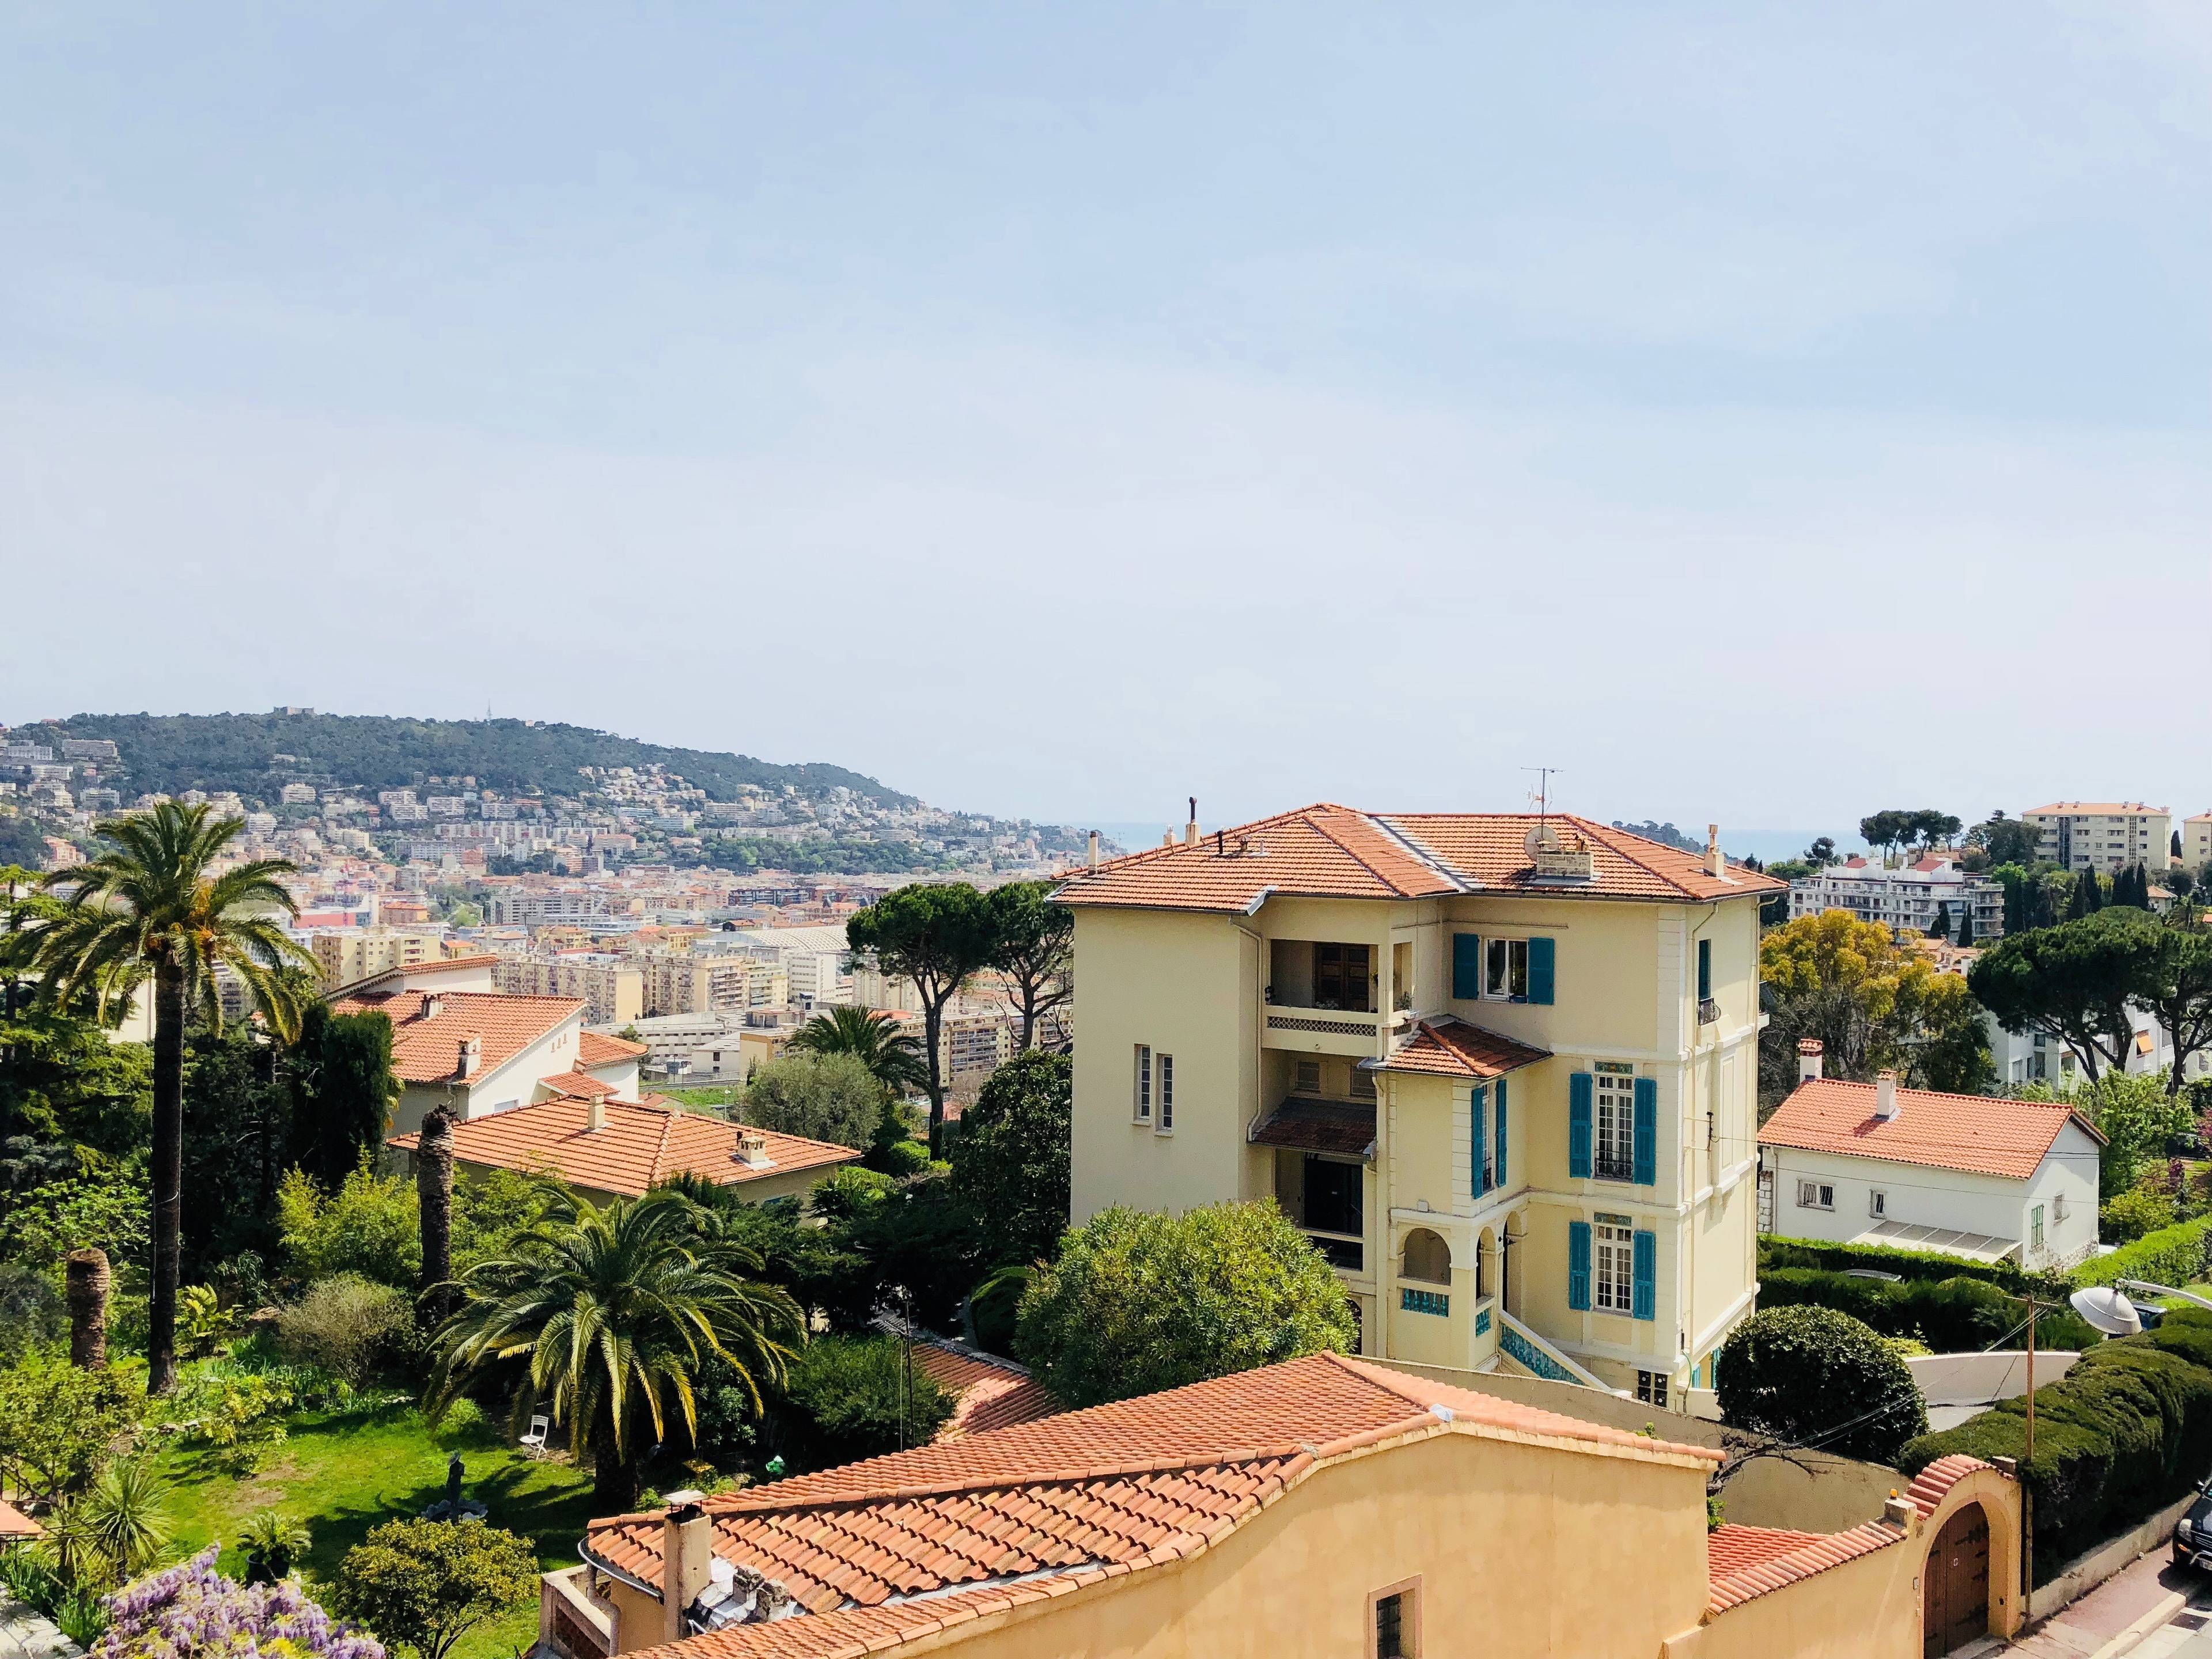 2 bedroom apartment in the heart of Cimiez, Nice, Côte d'Azur